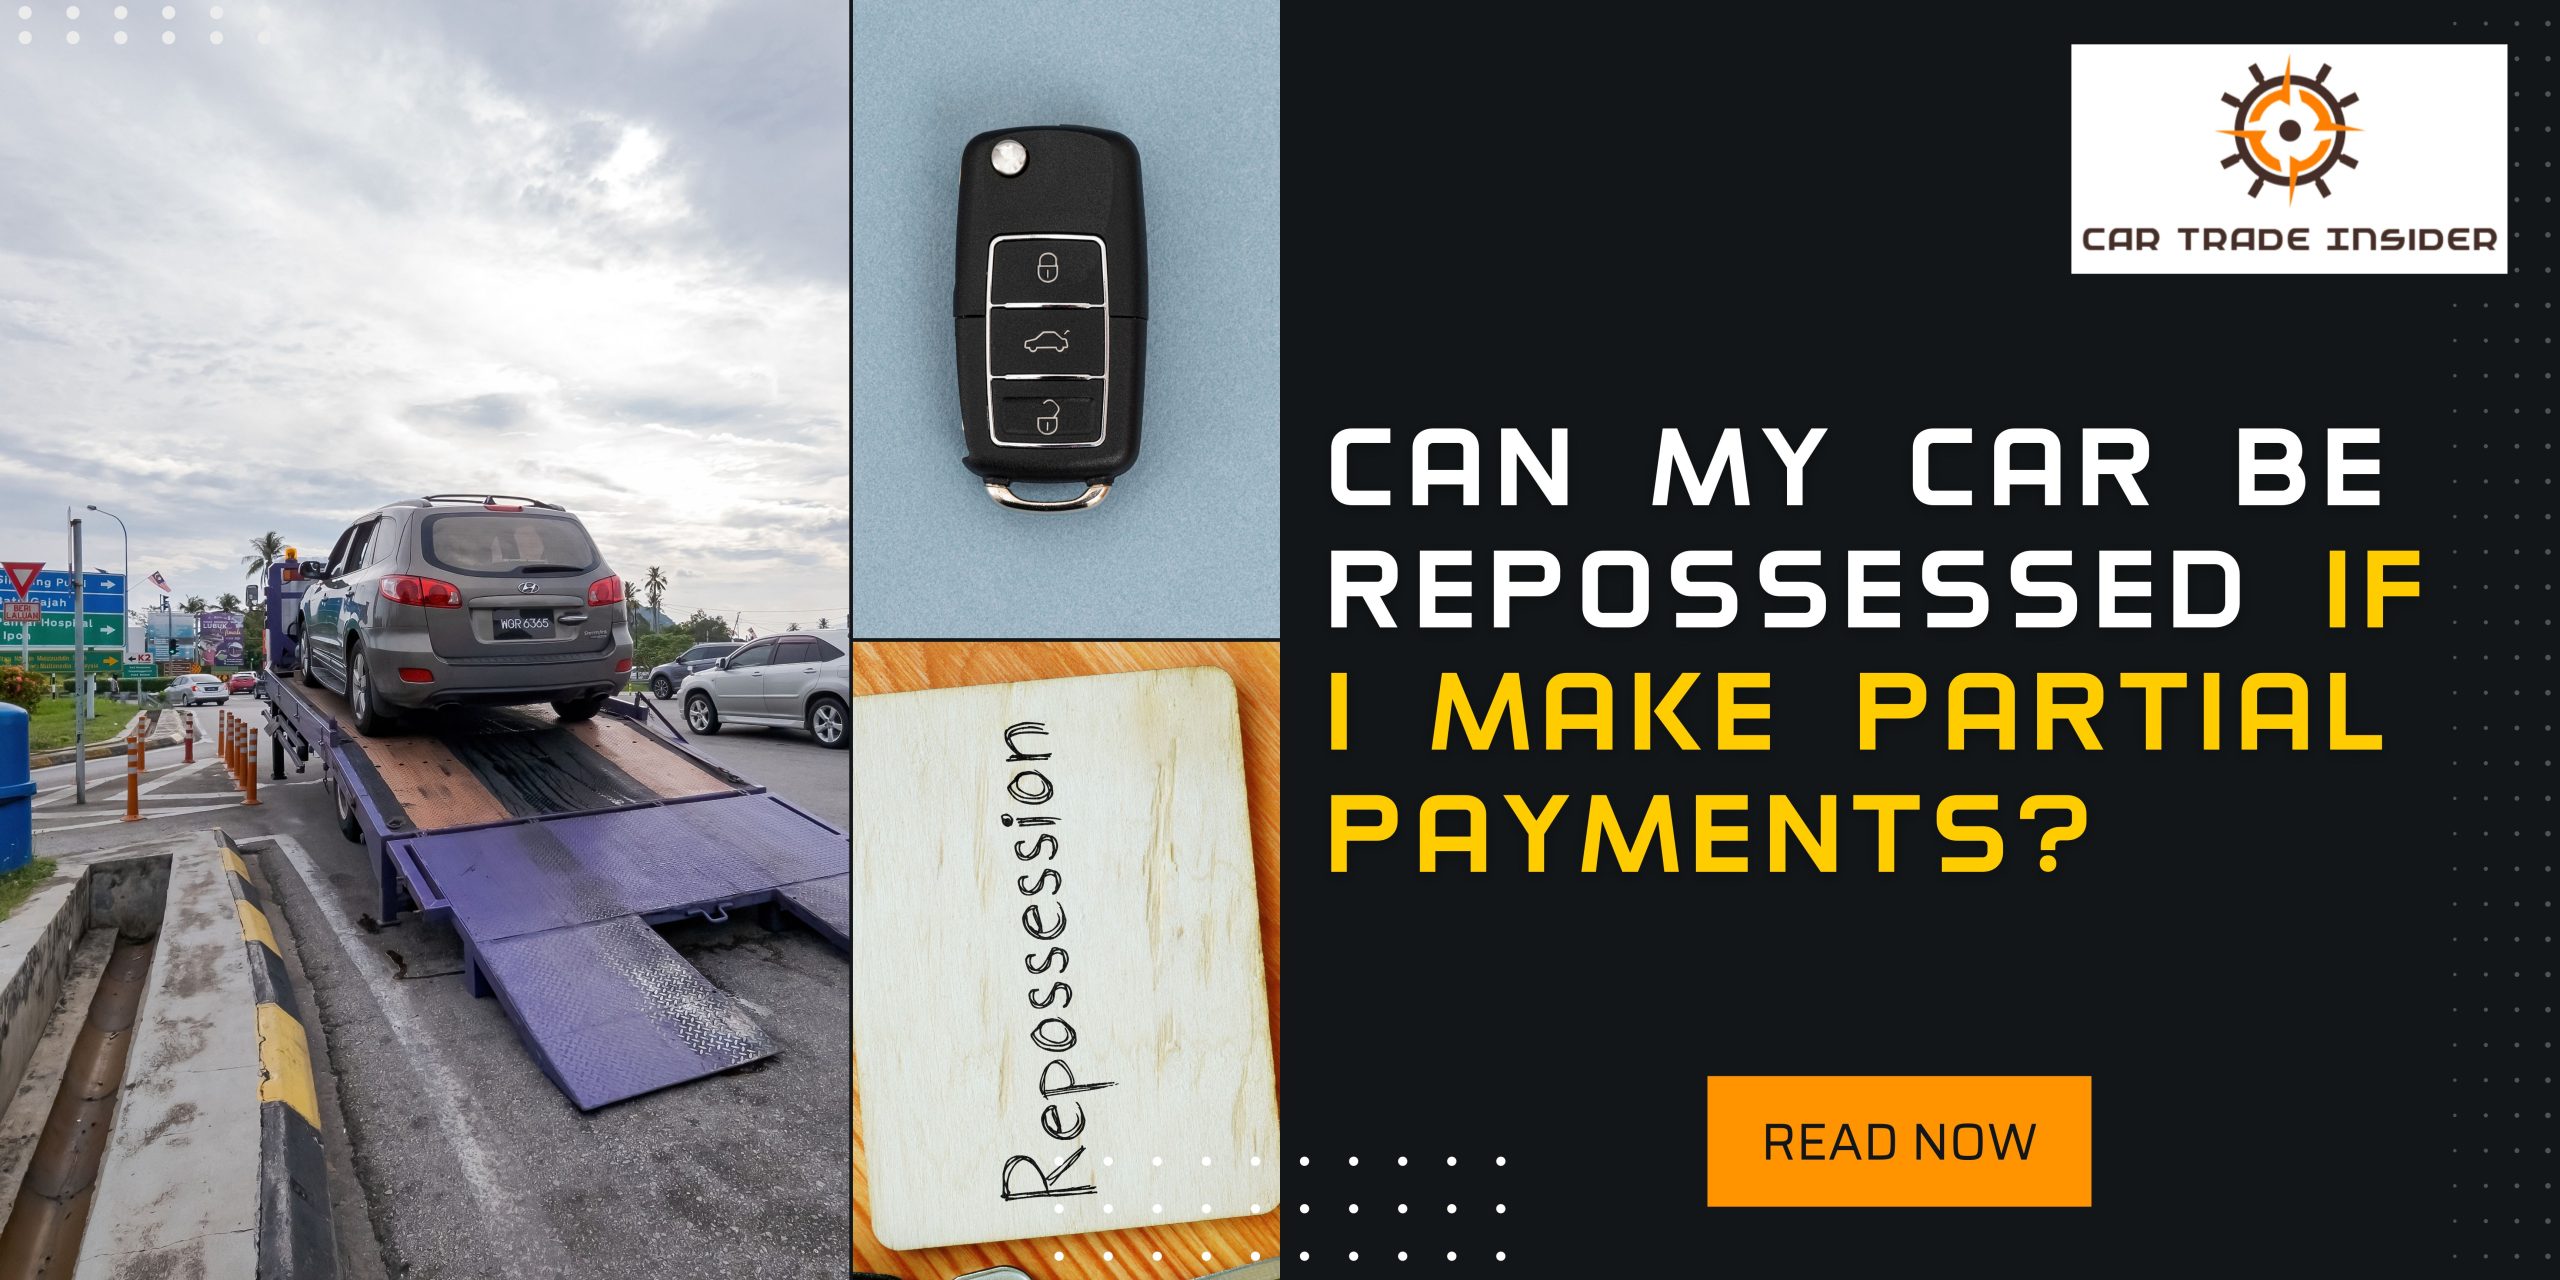 You are currently viewing Can My Car be Repossessed if I Make Partial Payments?